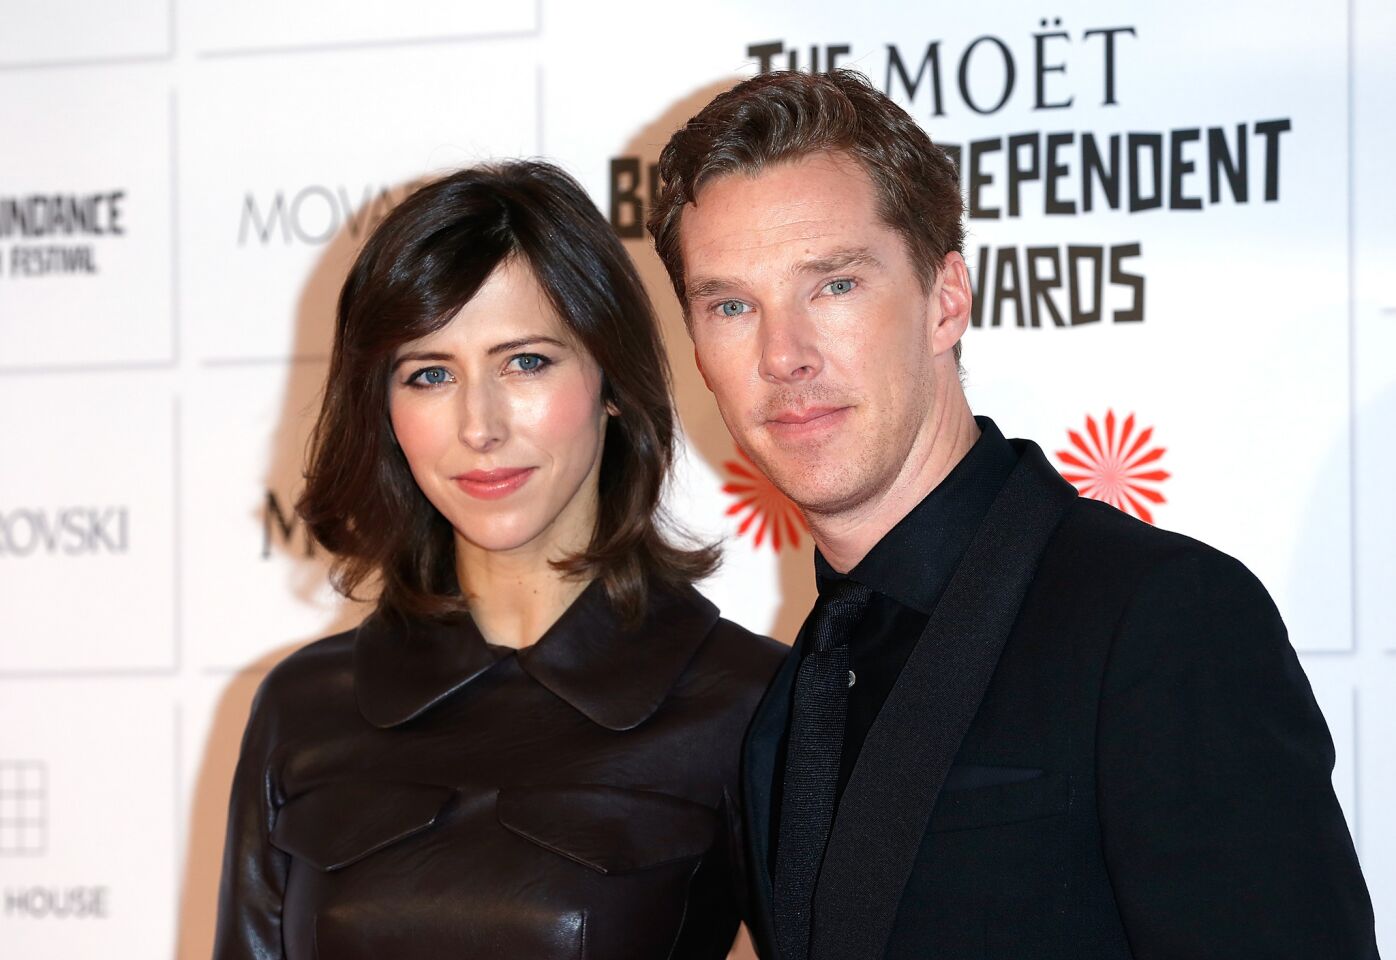 Cumberbatch was engaged to theater director Sophie Hunter on Nov. 5, 2014. They're shown at the Moet British Independent Film Awards on Dec. 7, 2014